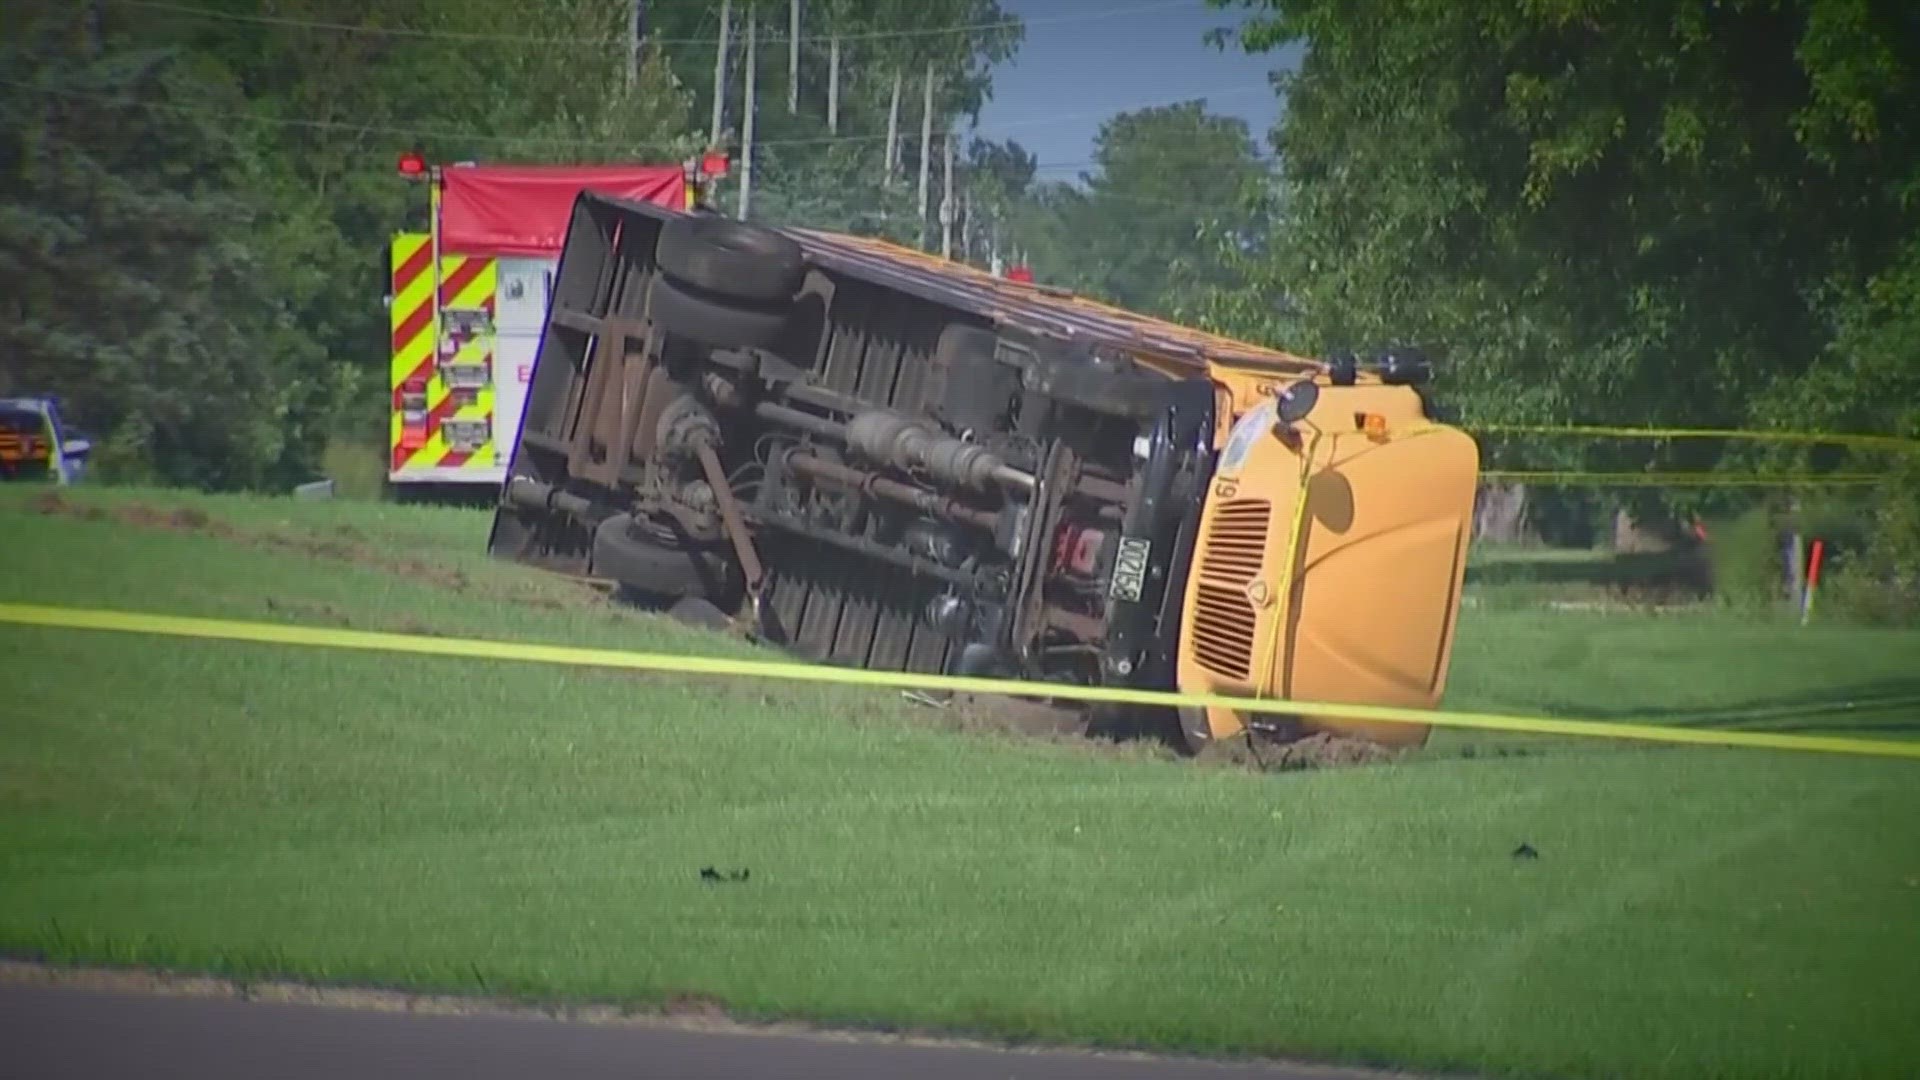 A school bus full of children overturned after a crash with a minivan in Clark County, killing one child and injuring 23 others, one seriously, authorities said.